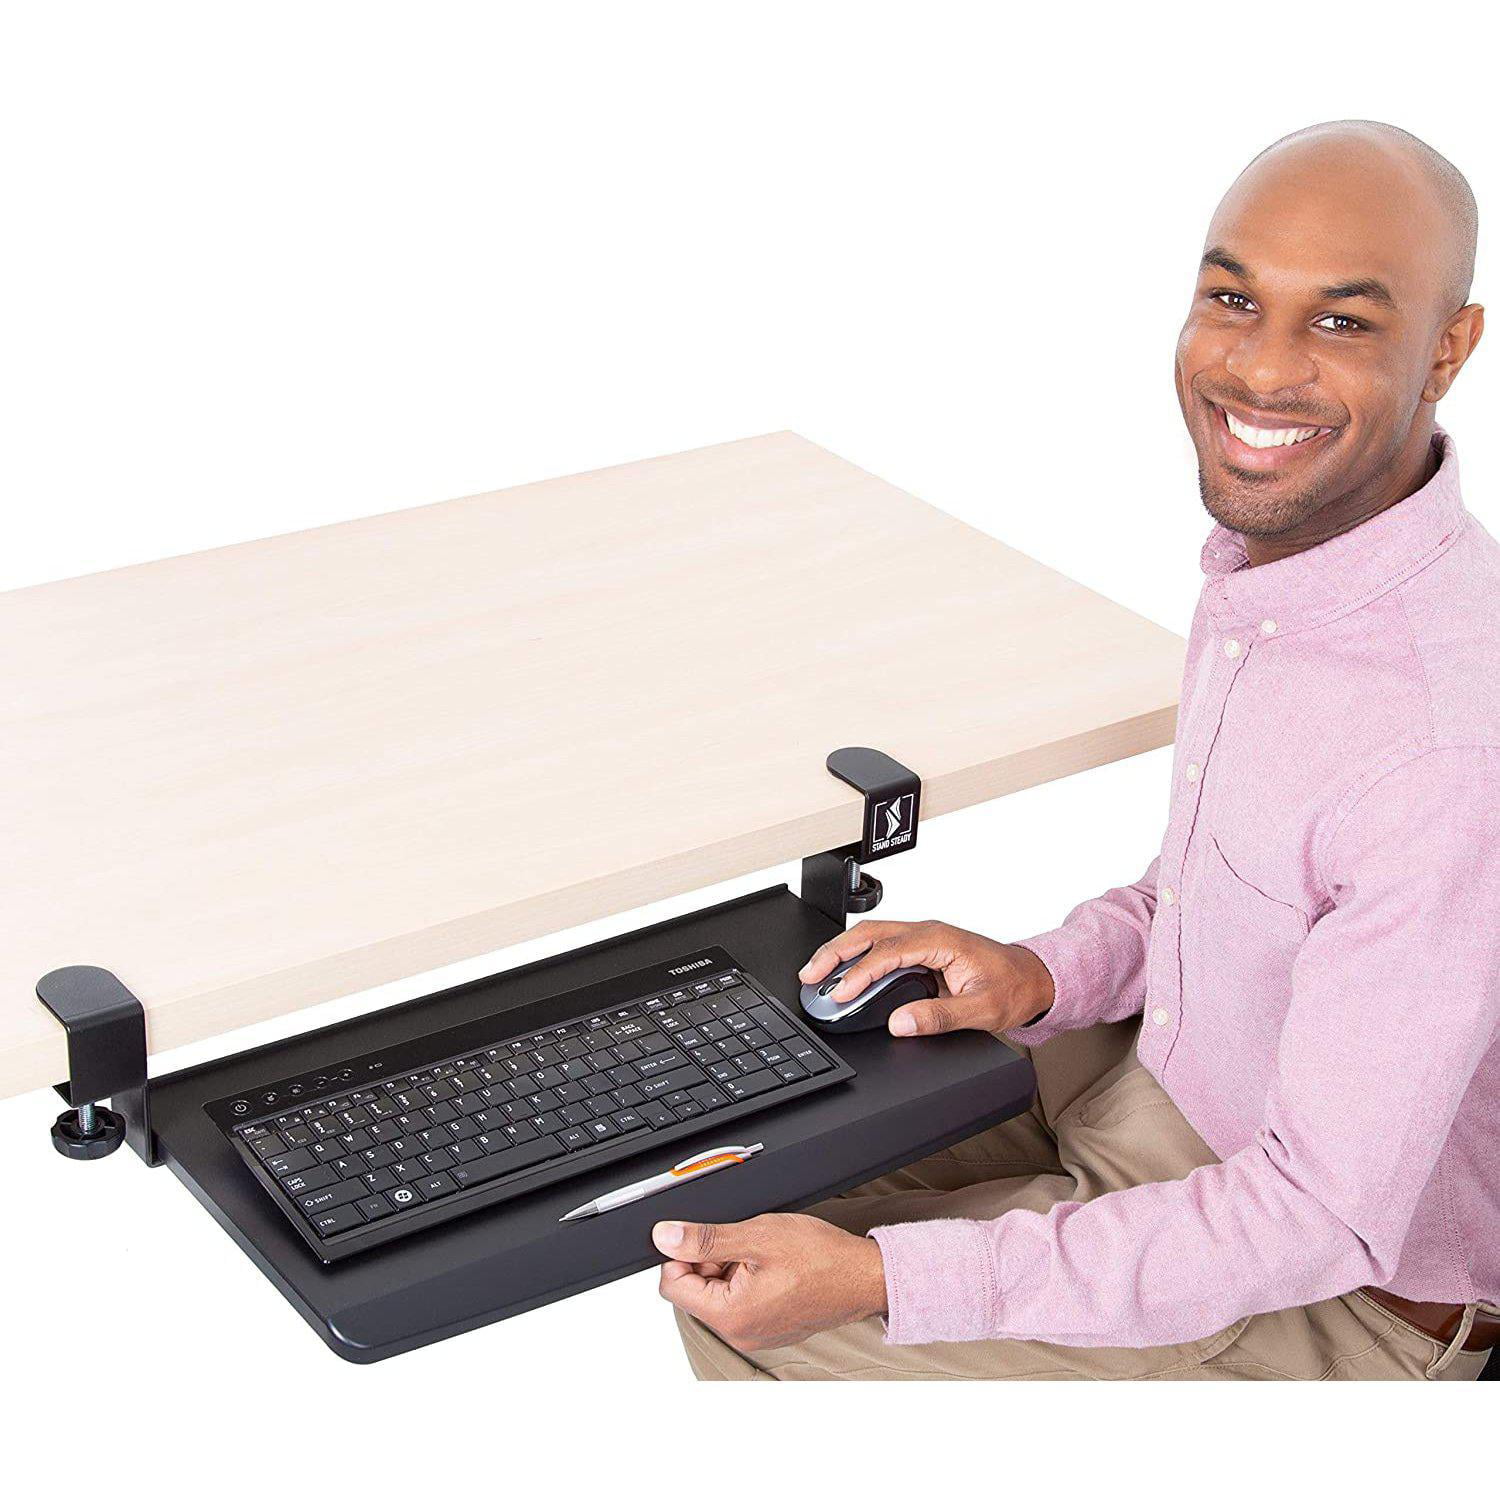 25" Keyboard Tray Under Desk With C Clamp-Large Size Steady Slide Movable Tray 